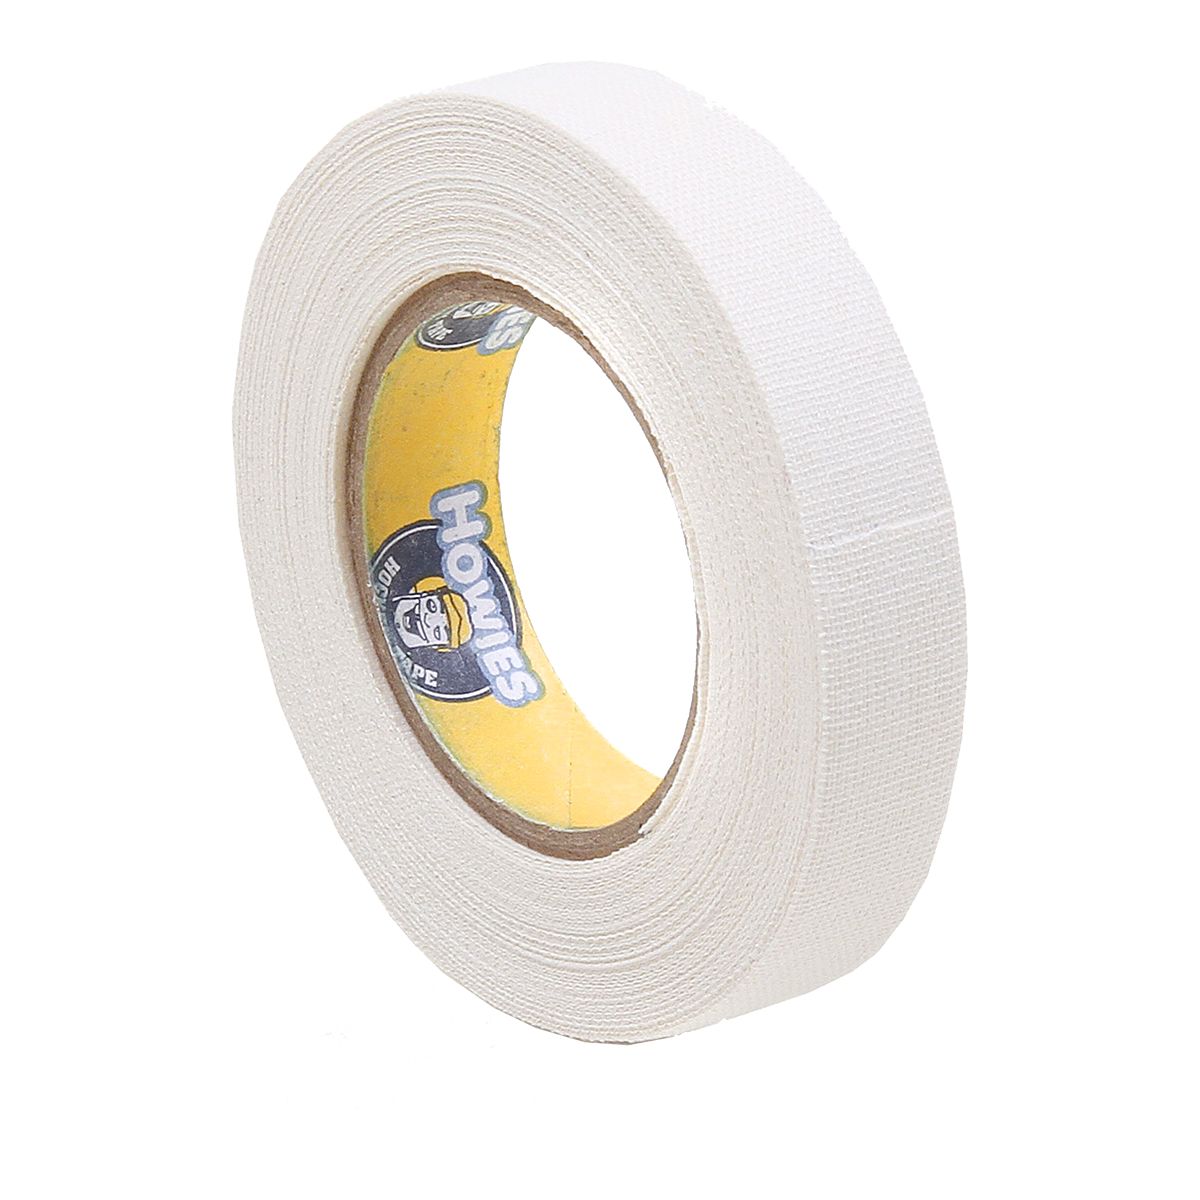 ACE Sports Tape, 1.5 in x 360 in - 1 ct